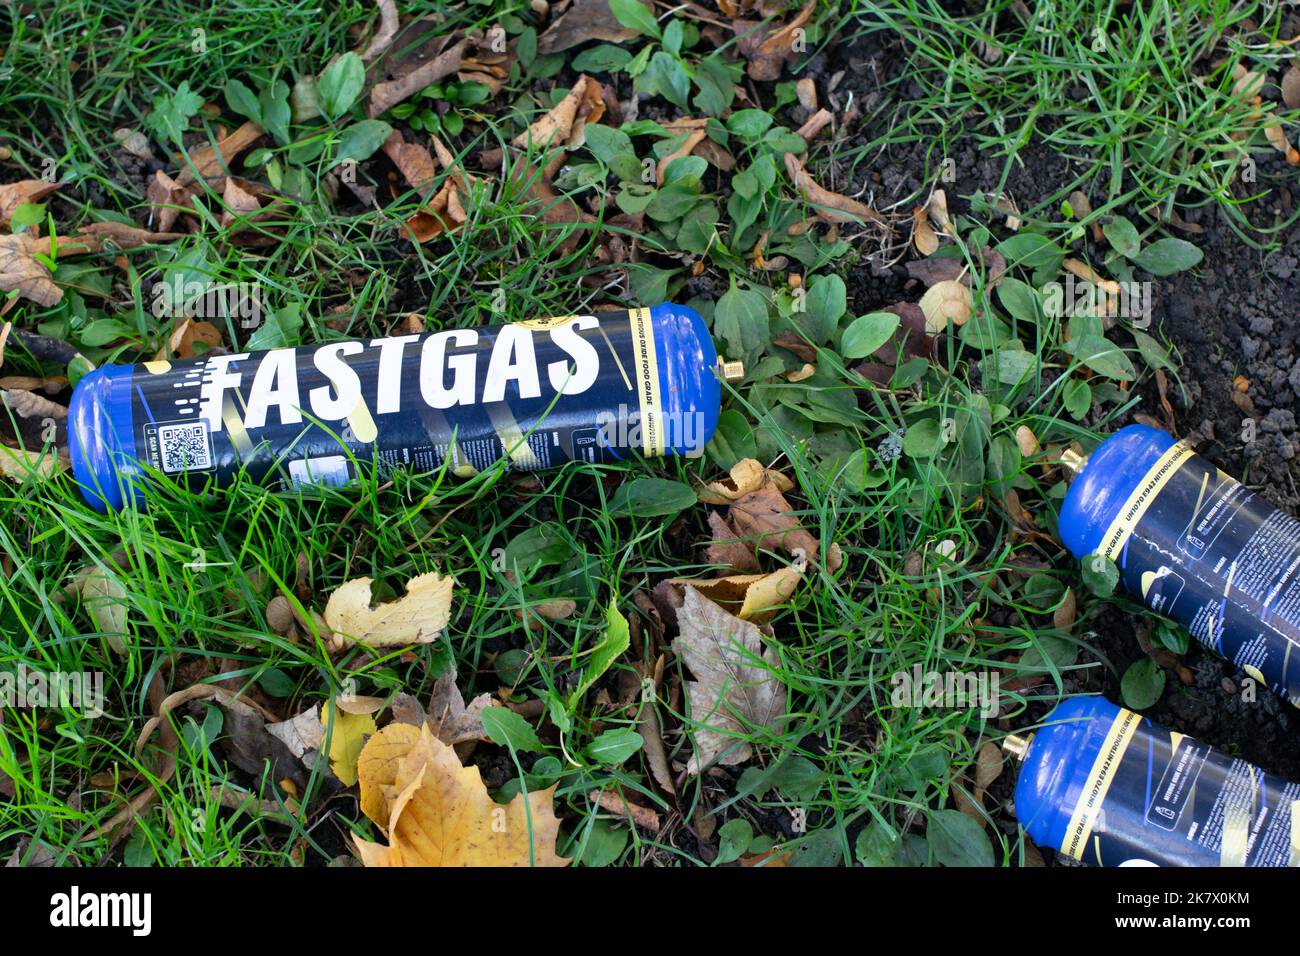 Discarded Fastgas Nitrous Oxide gas canister containers on grass. Stock Photo